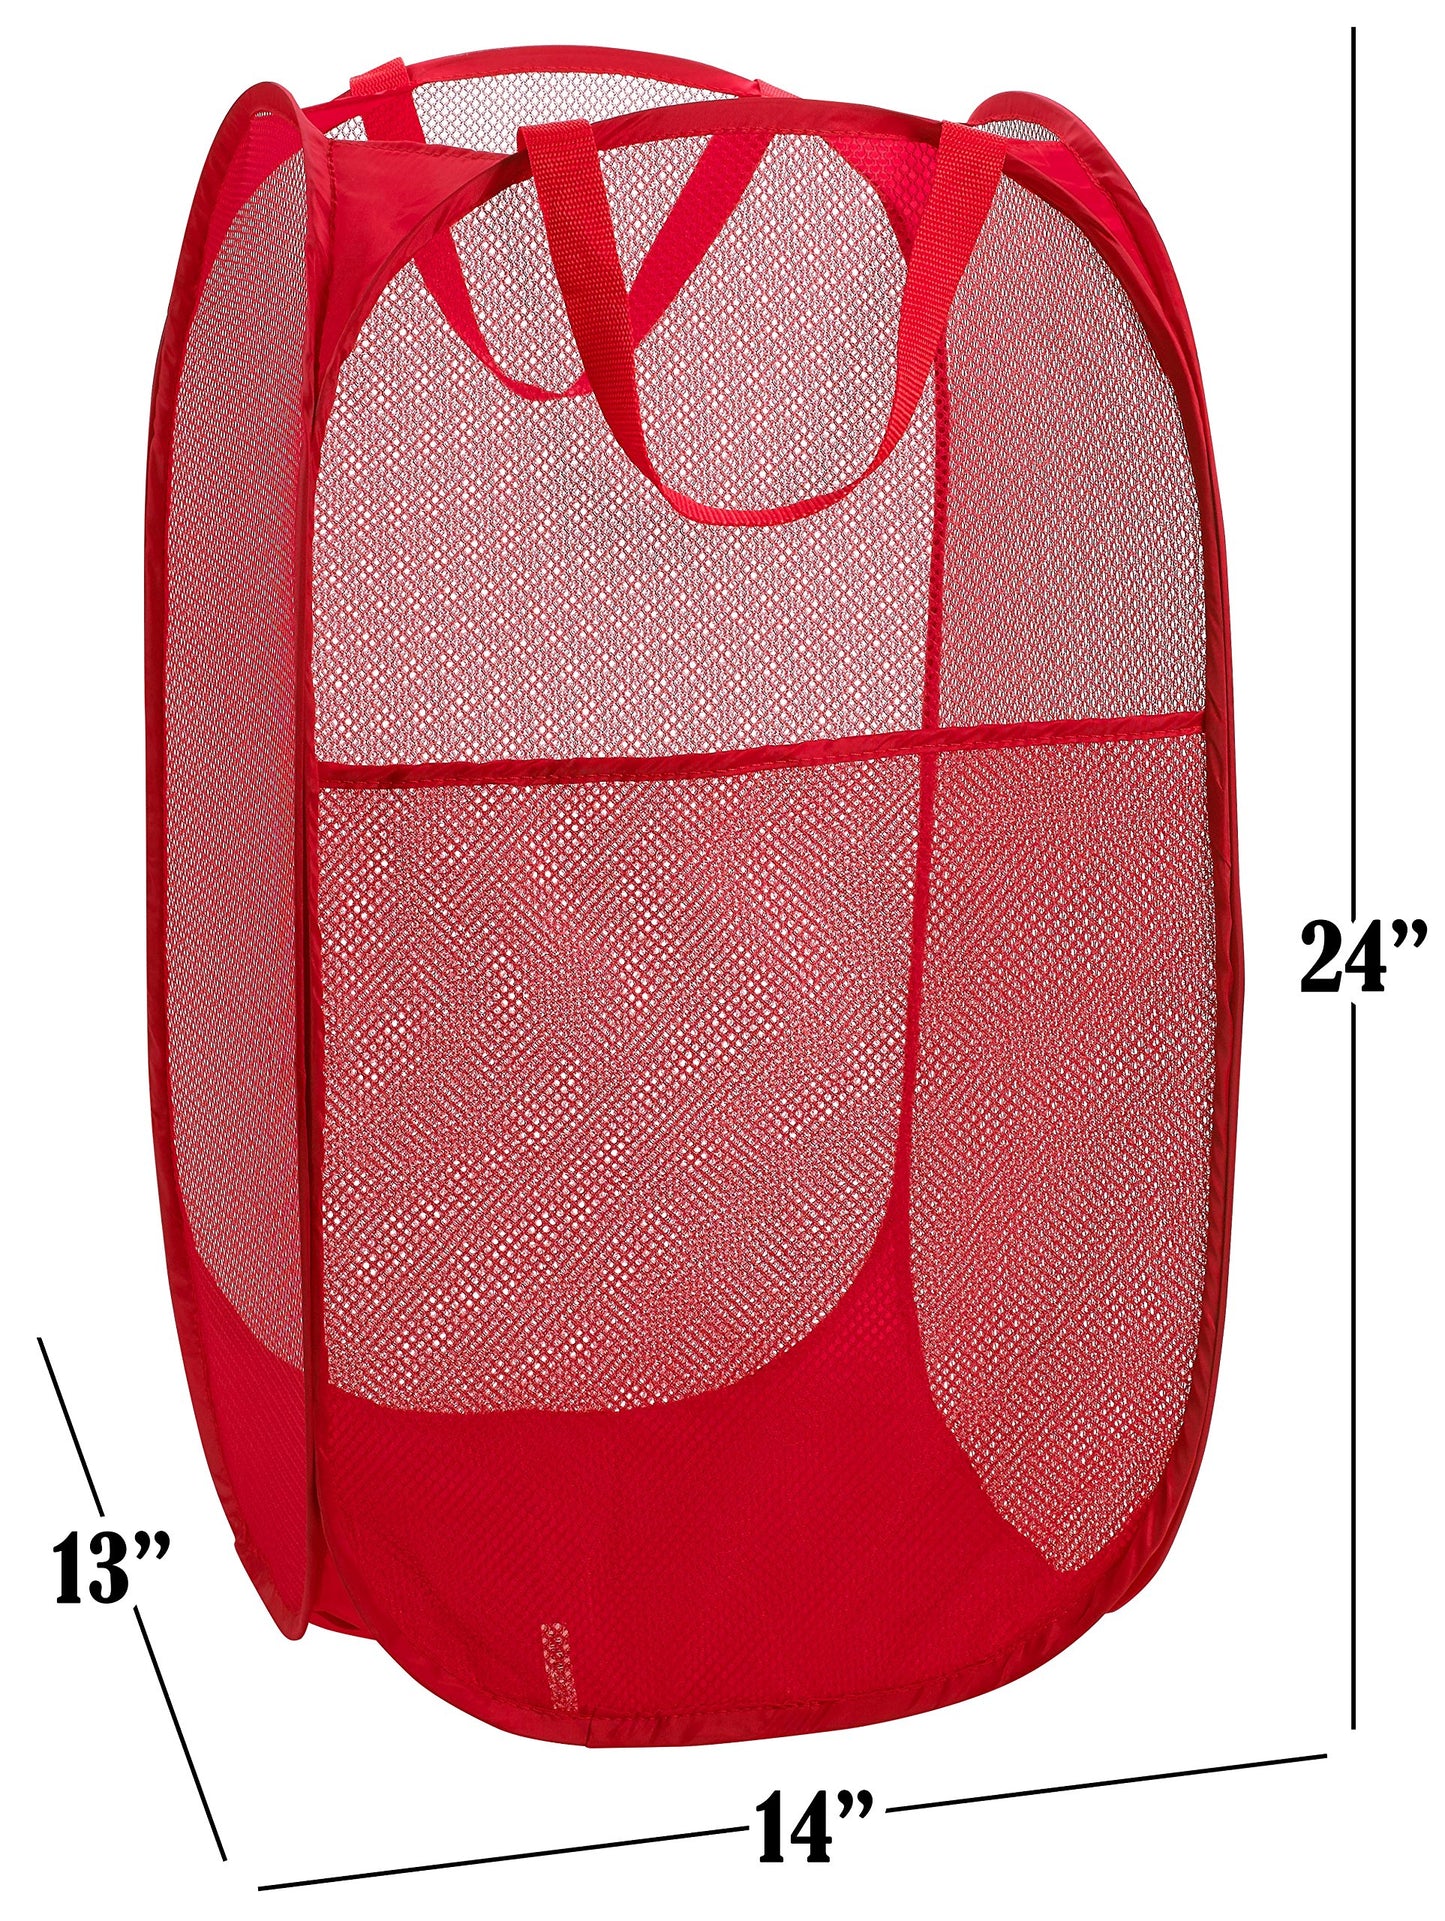 Mesh Popup Laundry Hamper - Portable, Durable Handles, Collapsible for Storage and Easy to Open. Folding Pop-Up Clothes Hampers are Great for The Kids Room, College Dorm or Travel. (Red)